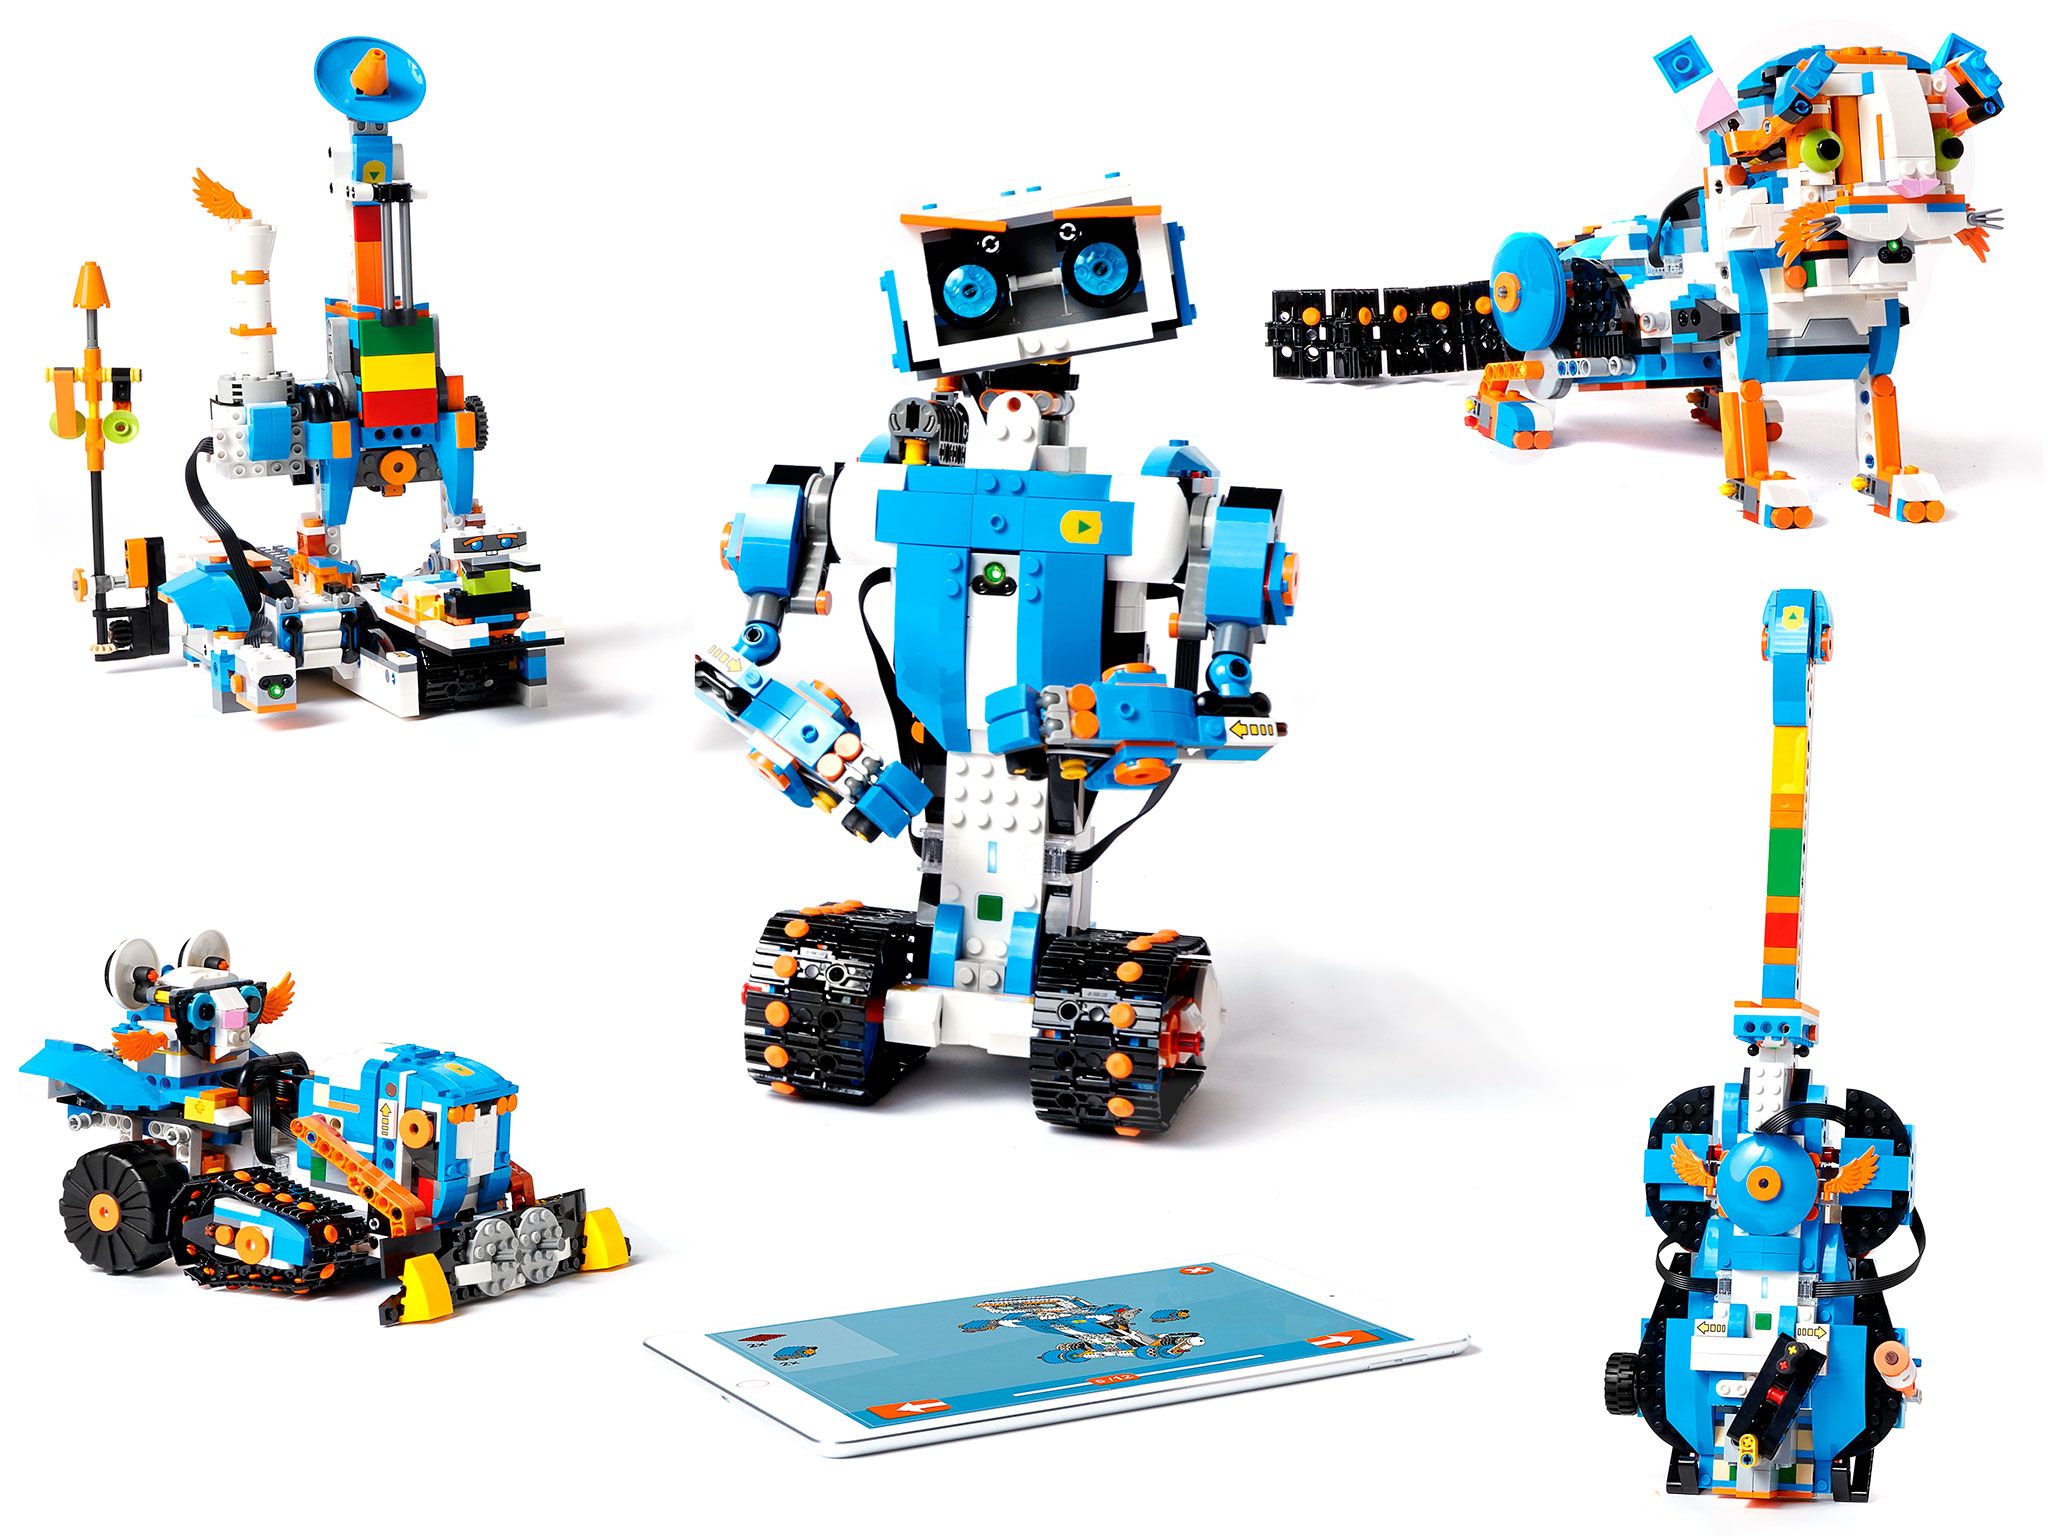 Lego is discontinuing its Mindstorms robotics kits by the end of the year